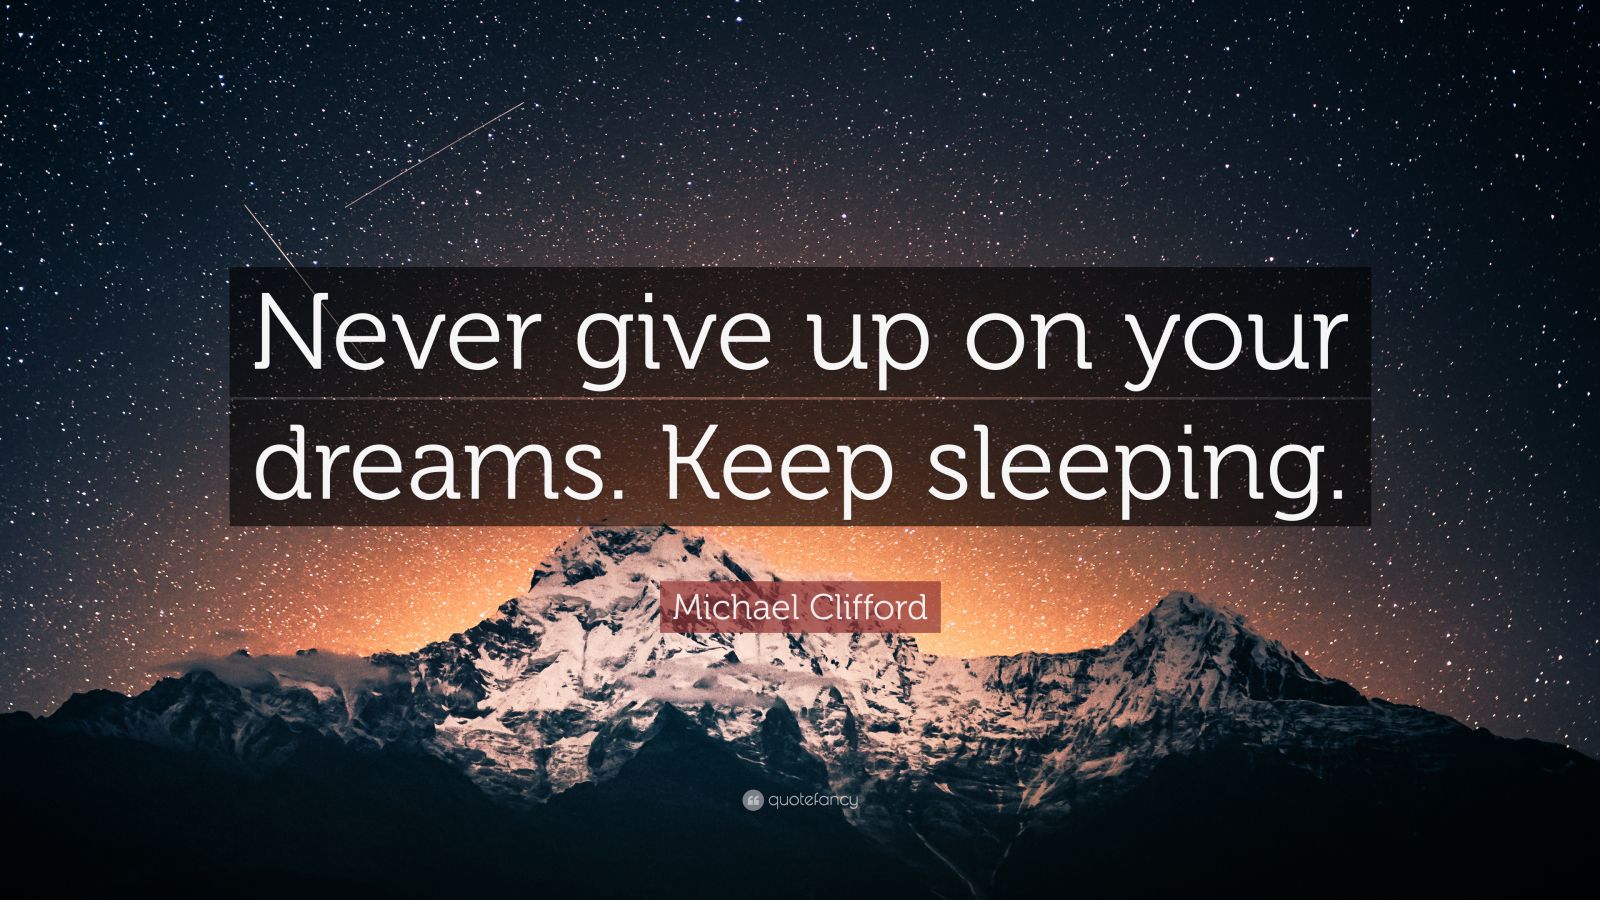 Michael Clifford Quote: “Never give up on your dreams. Keep sleeping.”